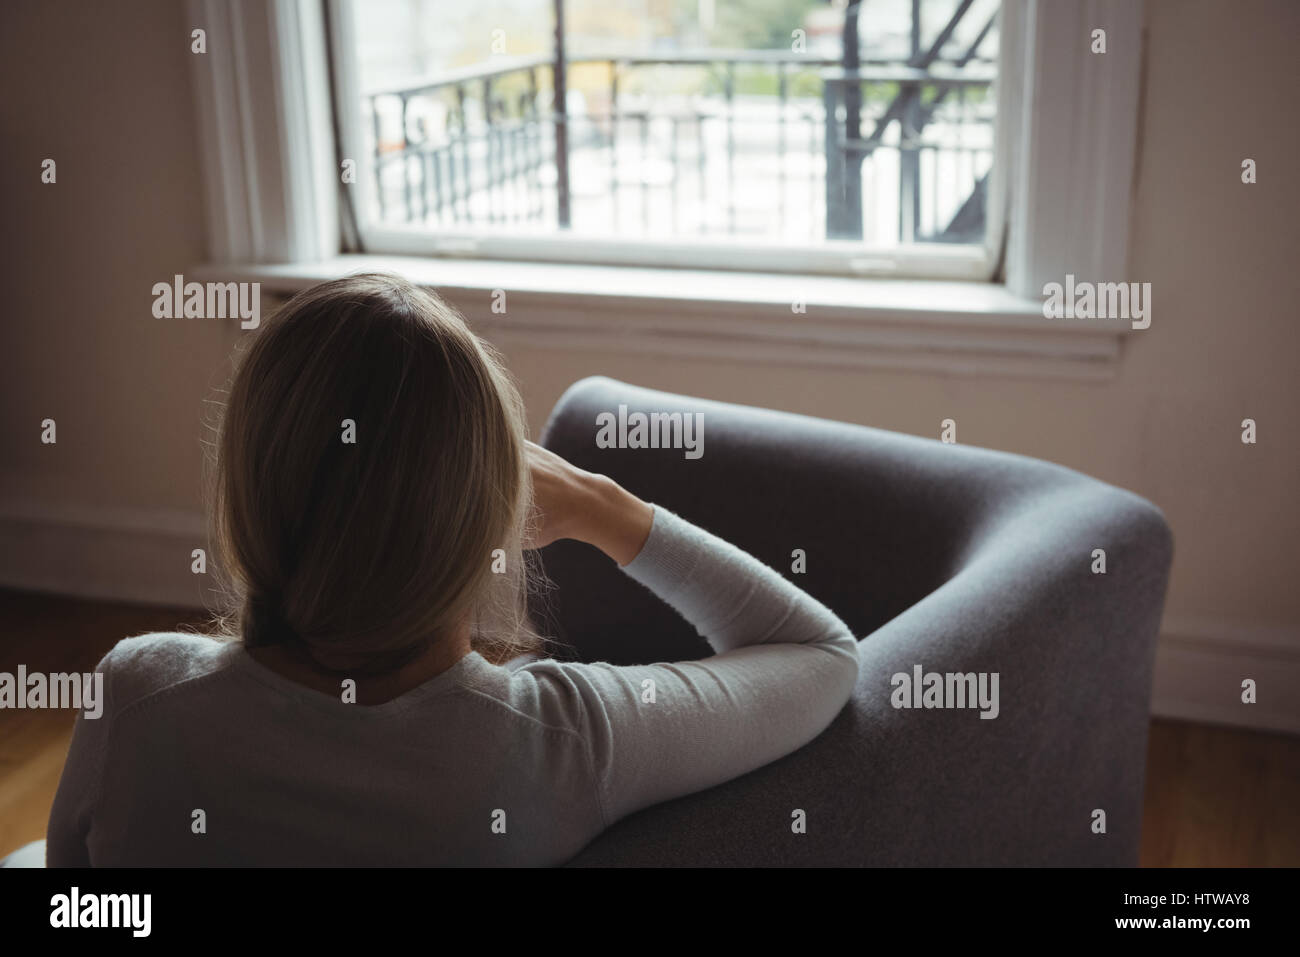 Rear view of woman sitting on sofa in living room Stock Photo